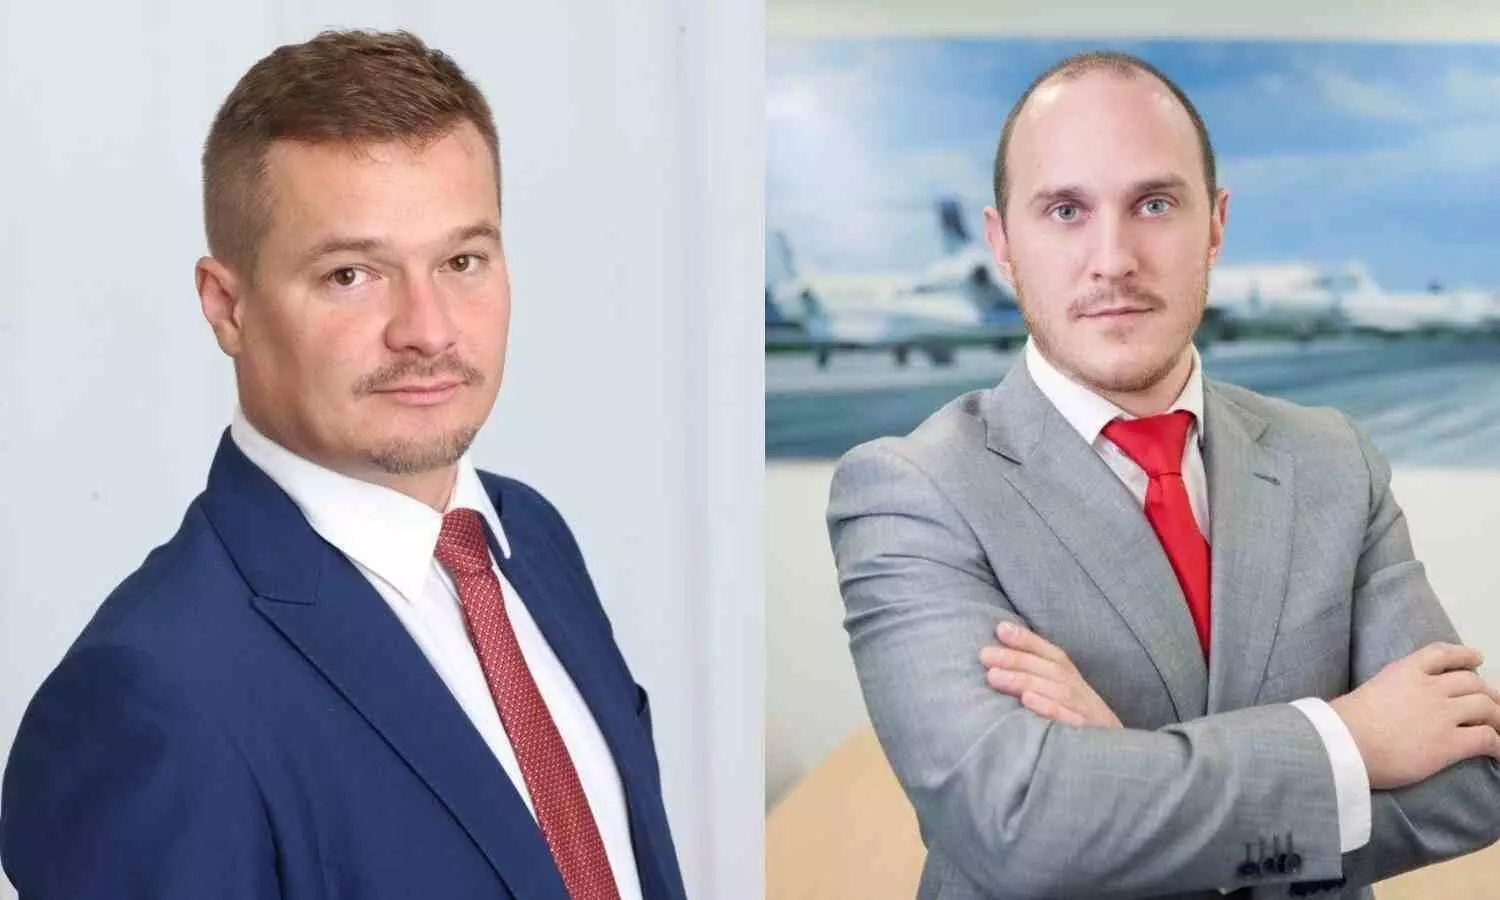 (Left) David Adamek, Chief Executive Officer, Skyport and (right) James Fitzgerald, Managing Director, Air Charter Service